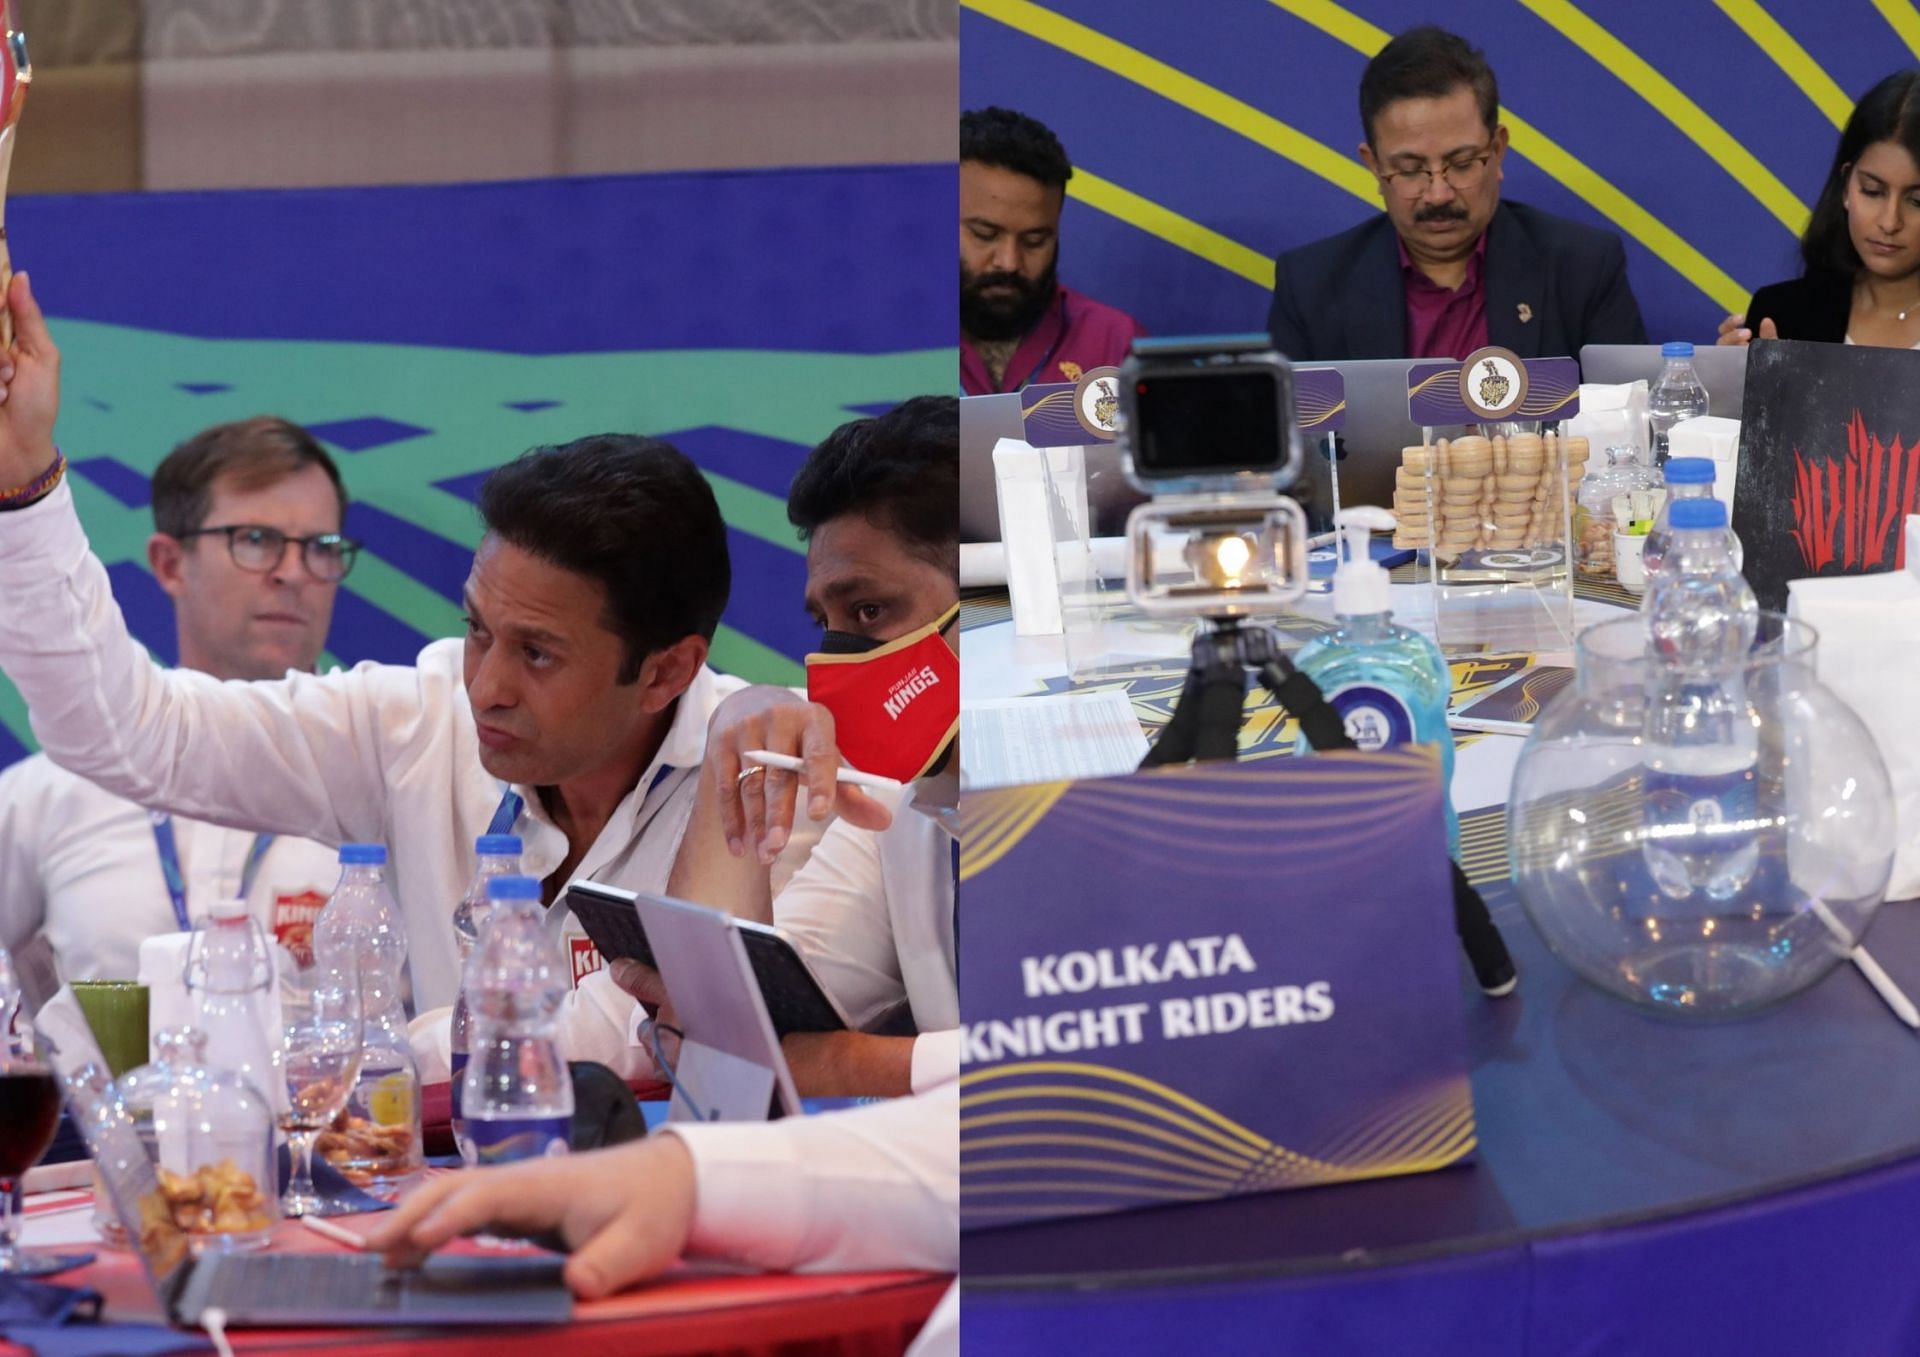 Punjab Kings and Kolkata Knight Riders endured contrasting times at the IPL 2022 Auction (Picture credits: IPL).